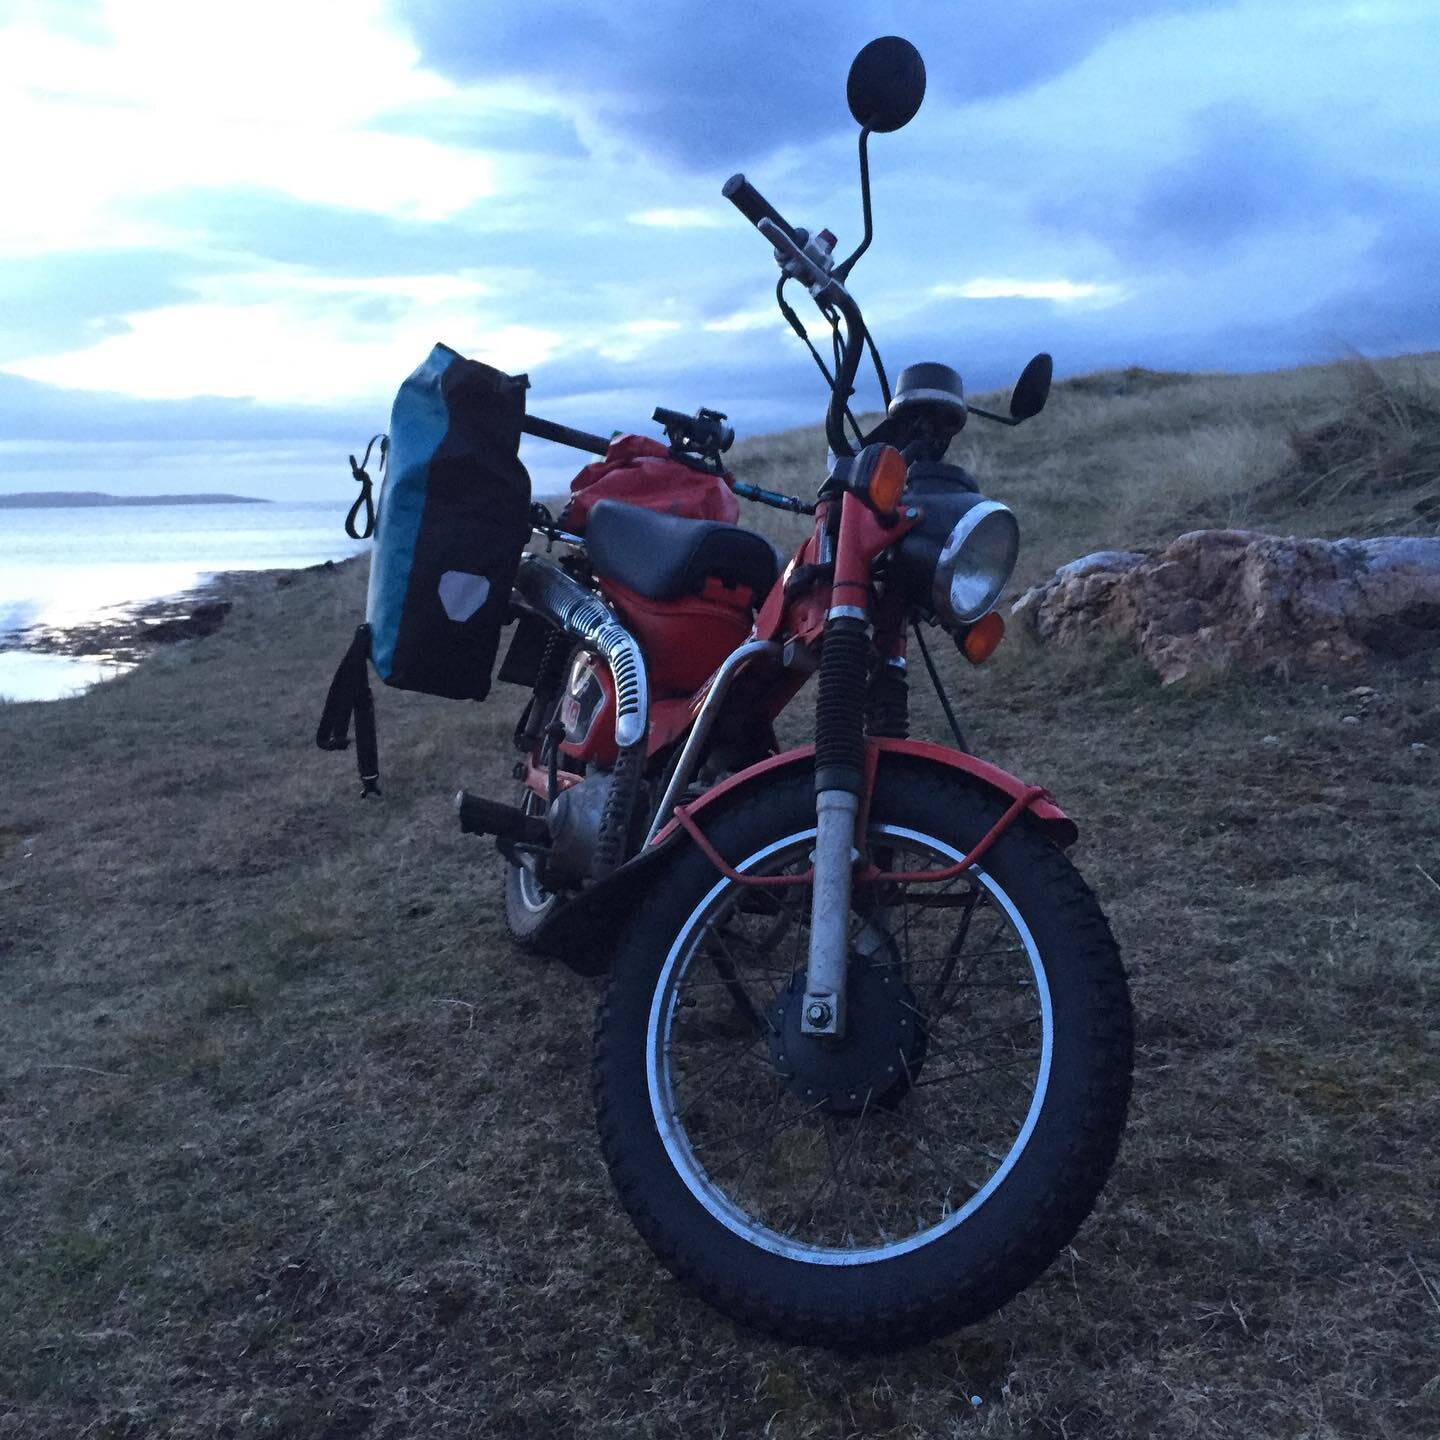 A break in proceedings. Quick in time, slow in pace trip round the Outer Hebrides with a long standing pal, Ben. #honda #ct110 #postiebike #hondact110 #yamaha #tenere #yamahatenere